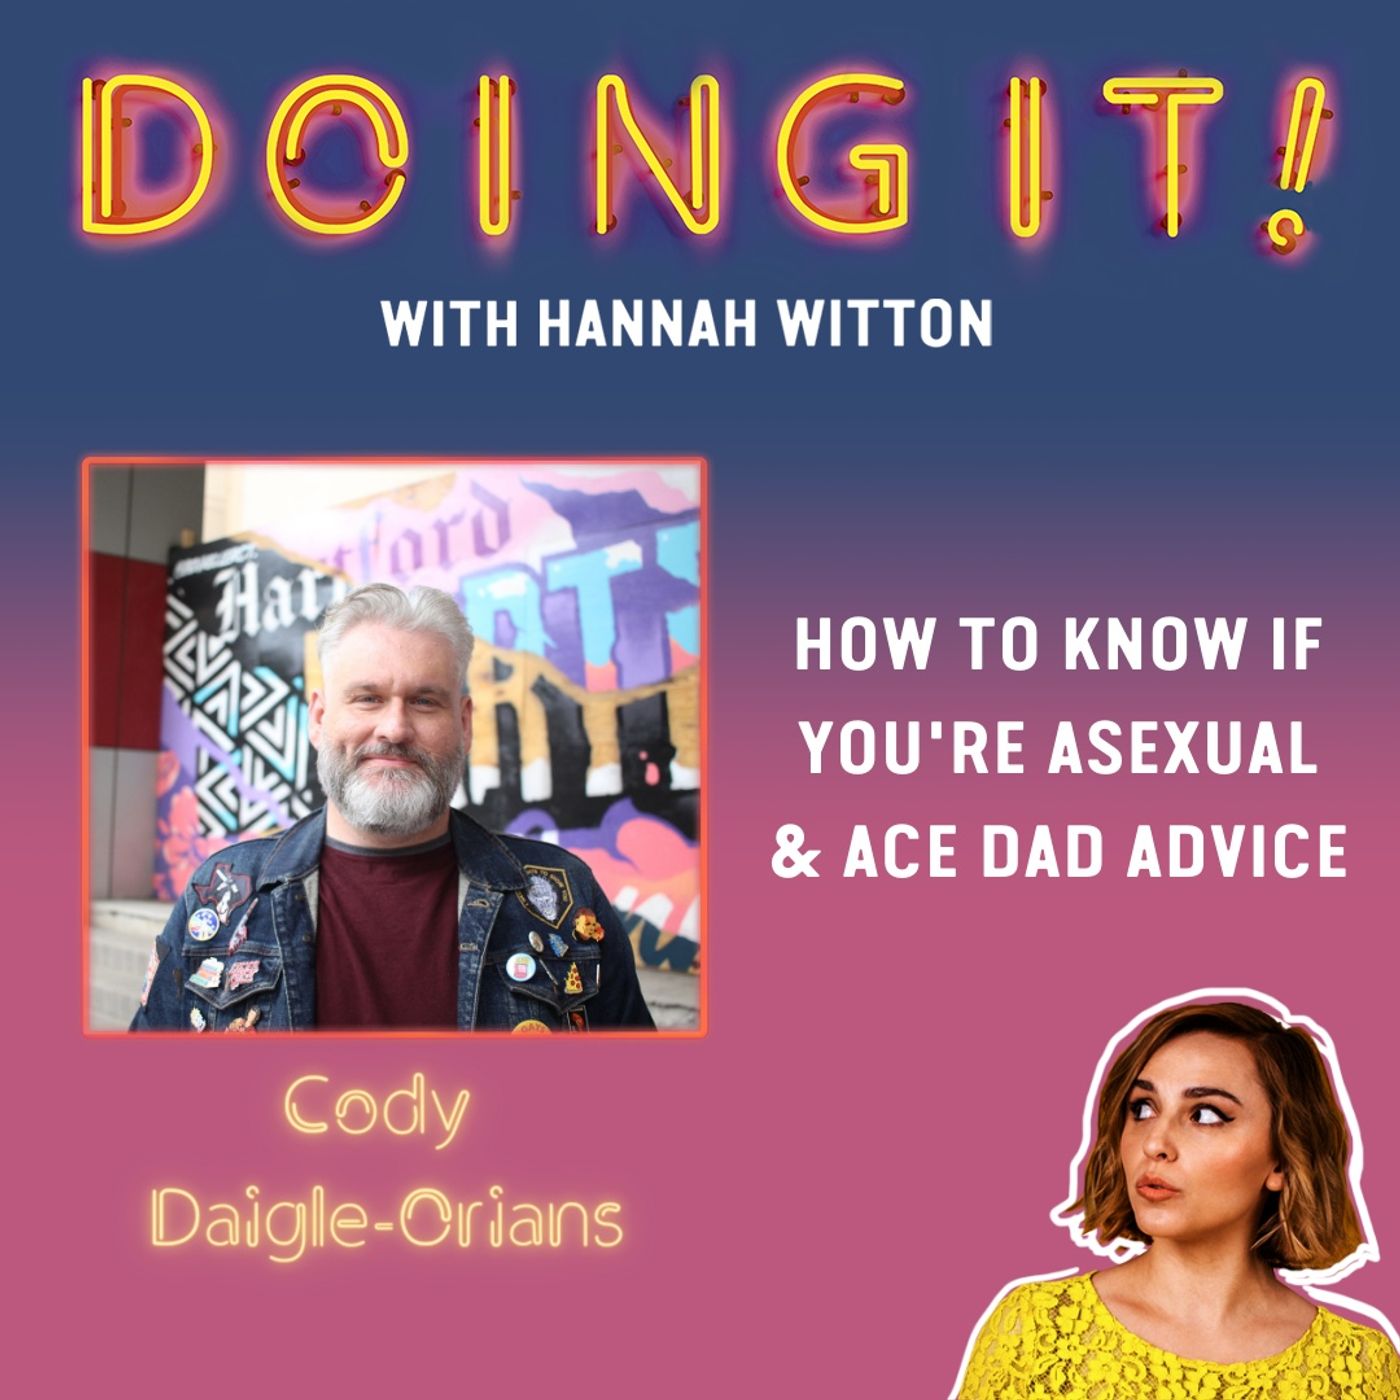 How To Know If You’re Asexual & Ace Dad Advice with Cody Daigle-Orians